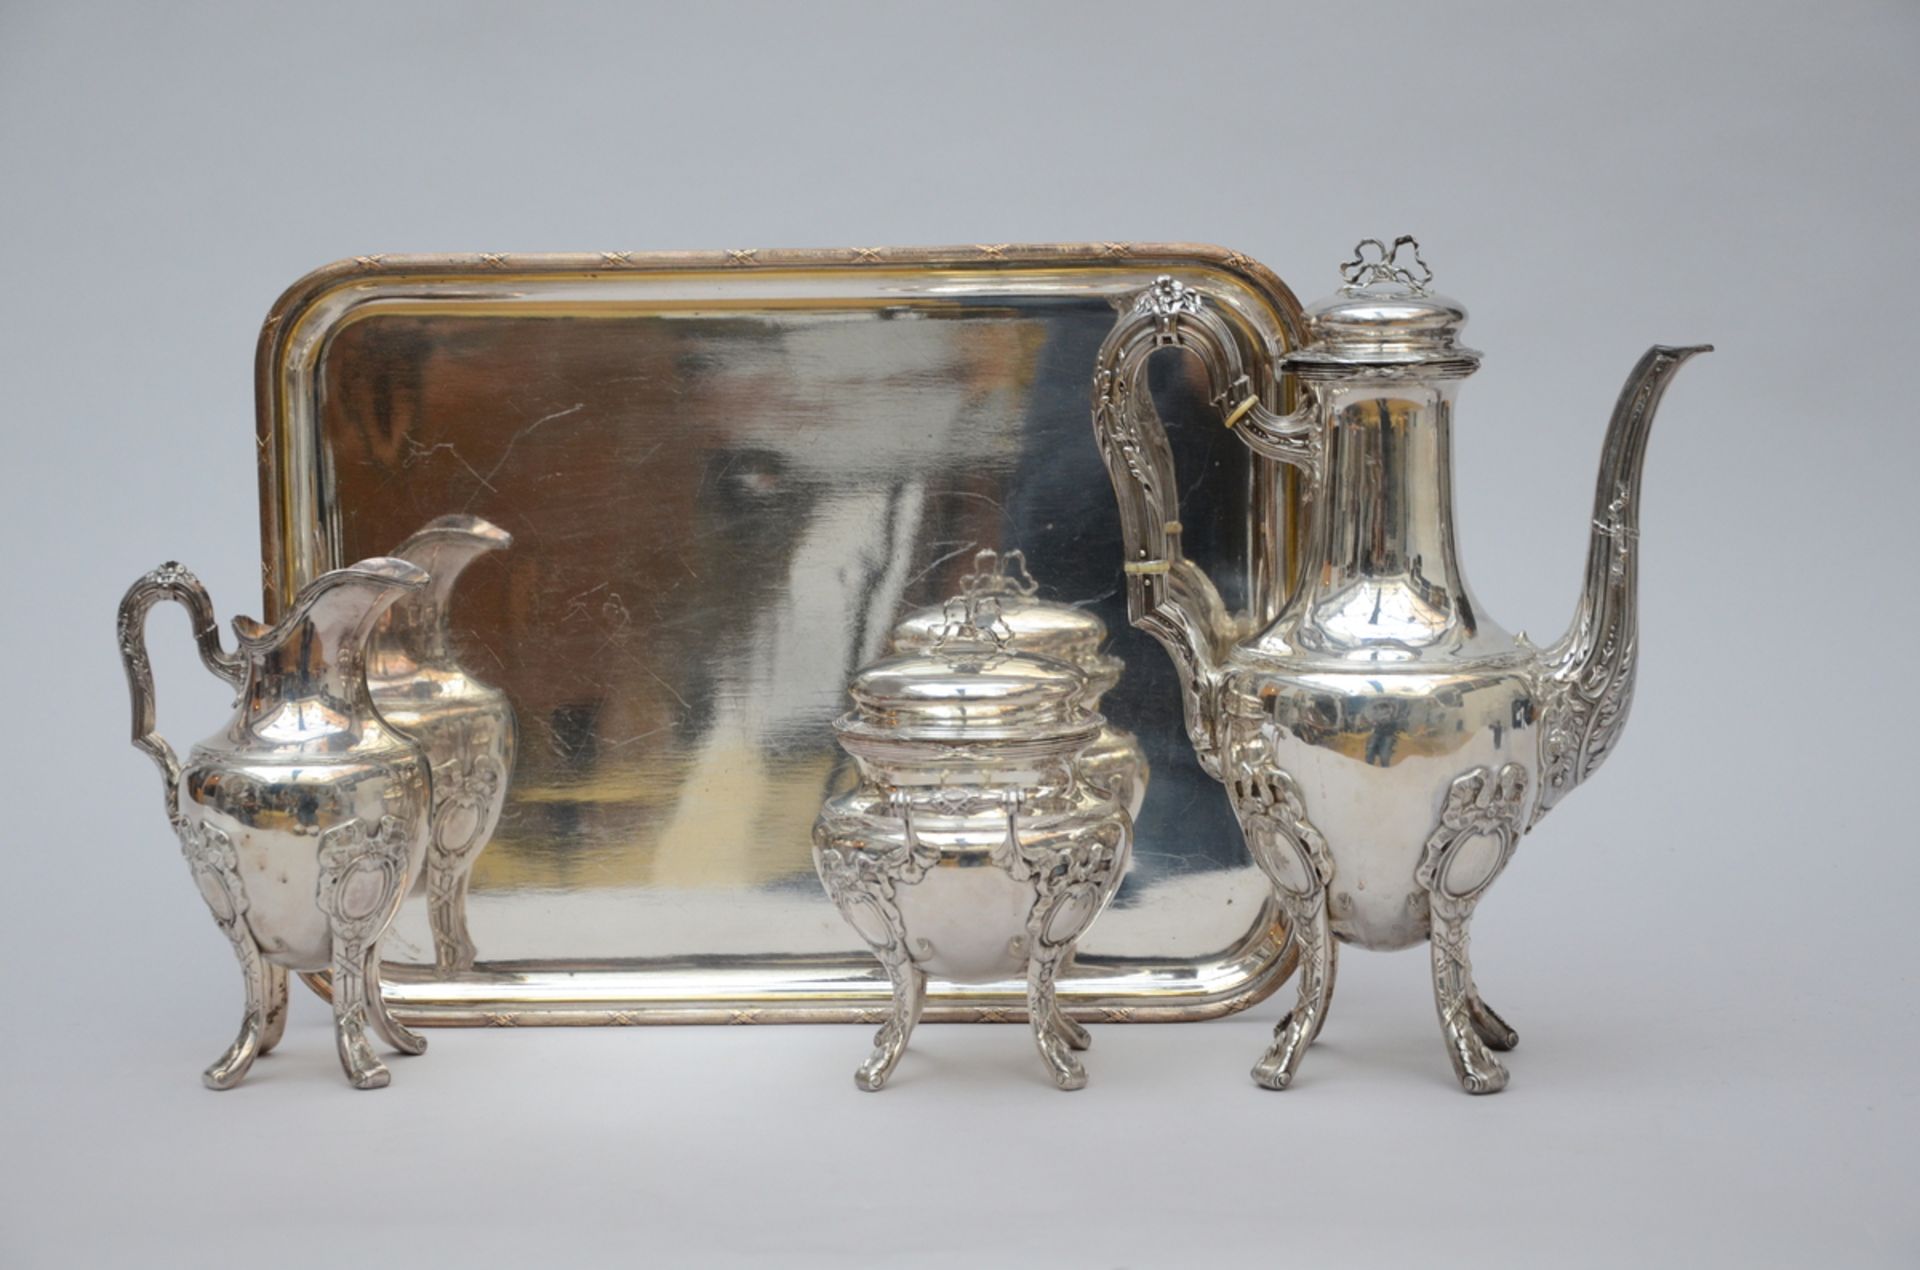 A three-piece coffee set in solid silver on a silver-plated tray, Delheid (jug h29cm) - Image 2 of 4